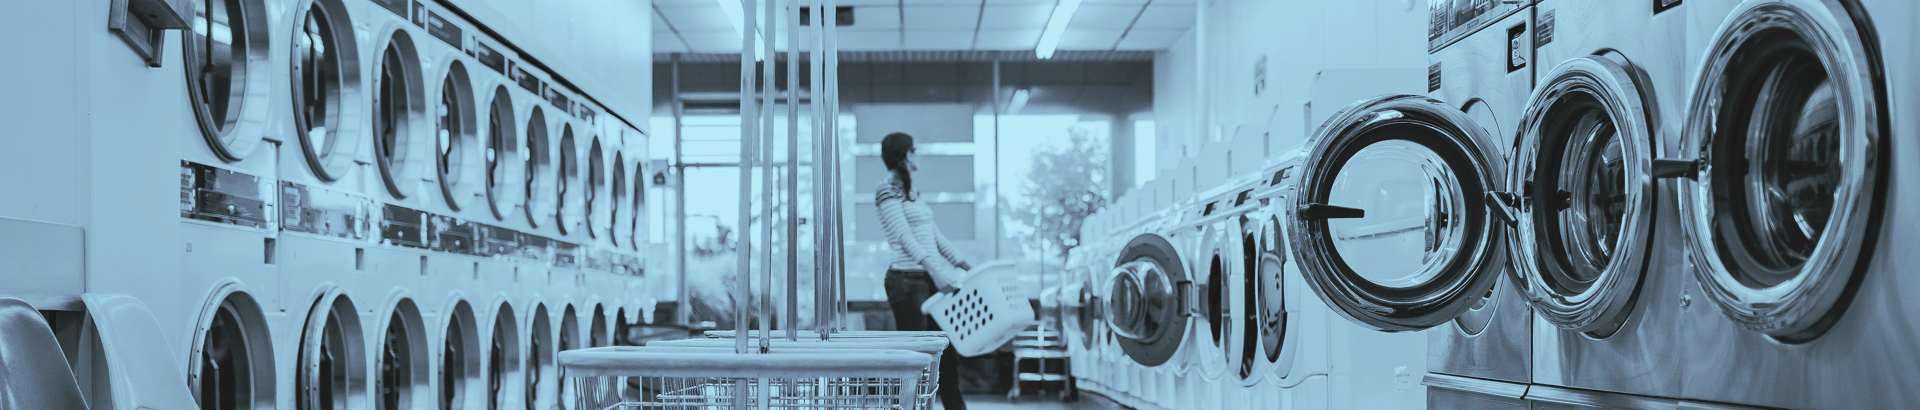 Laundromats, General and home services